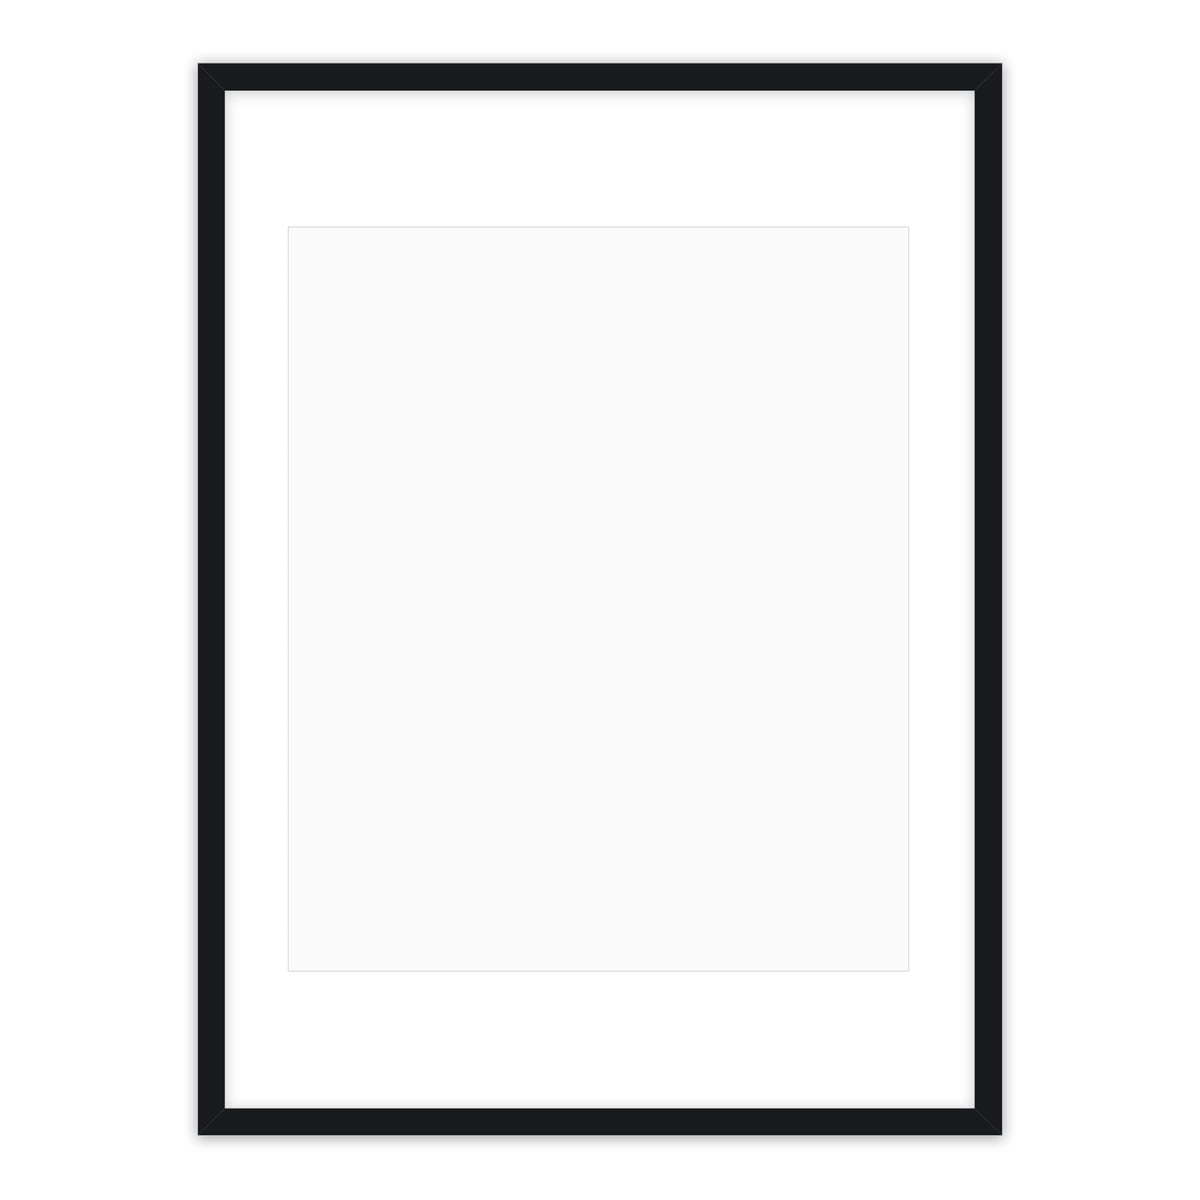 deluxe35 Picture Frame 84x48 cm or 48x84 cm Photo/Gallery/Poster Frame 